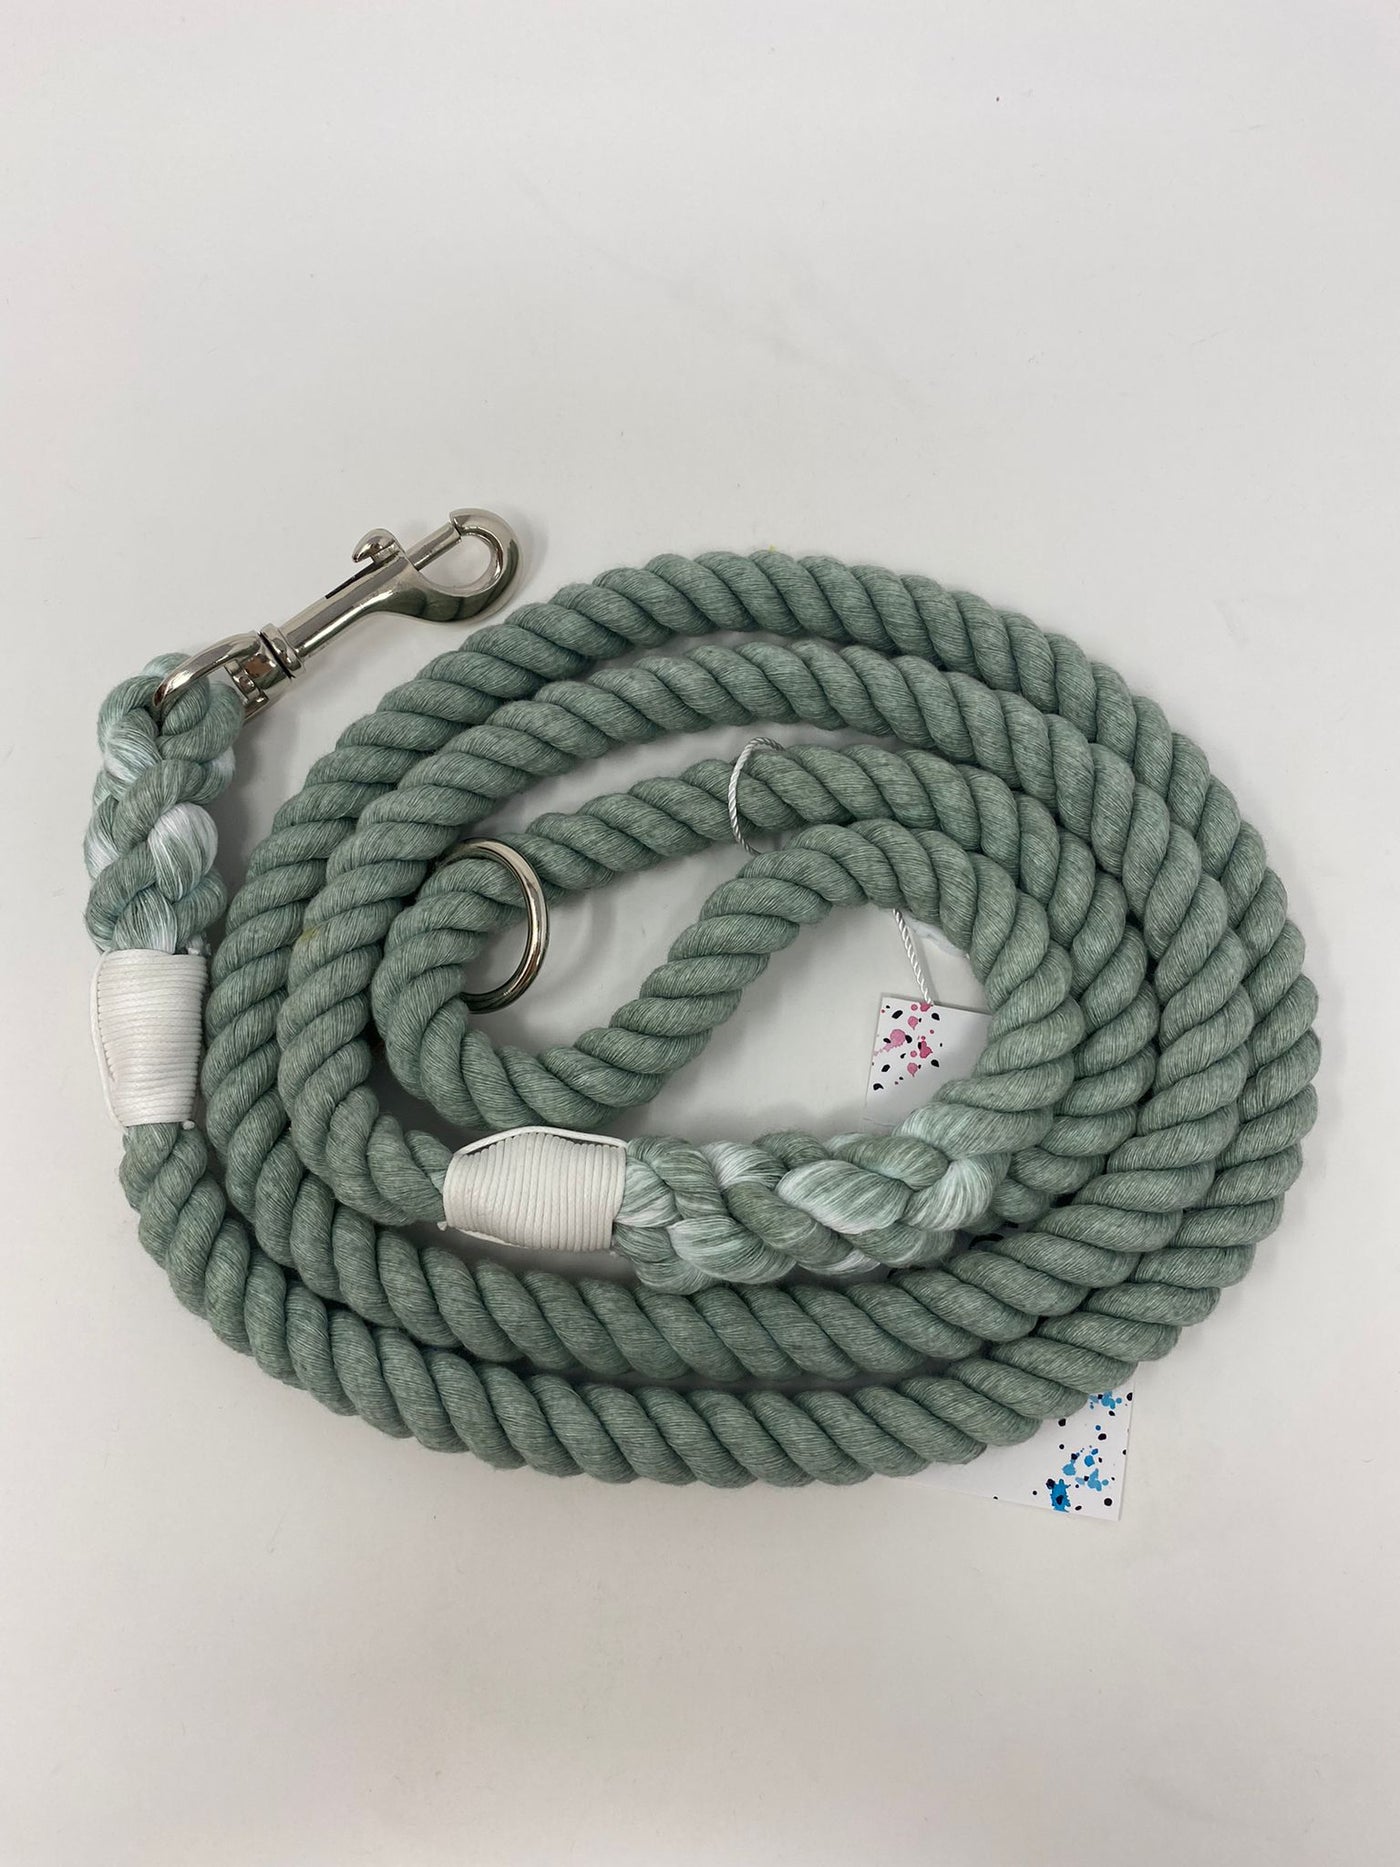 Outlet - SAGE MIST COTTON ROPE LEAD - SILVER HARDWARE - 0101